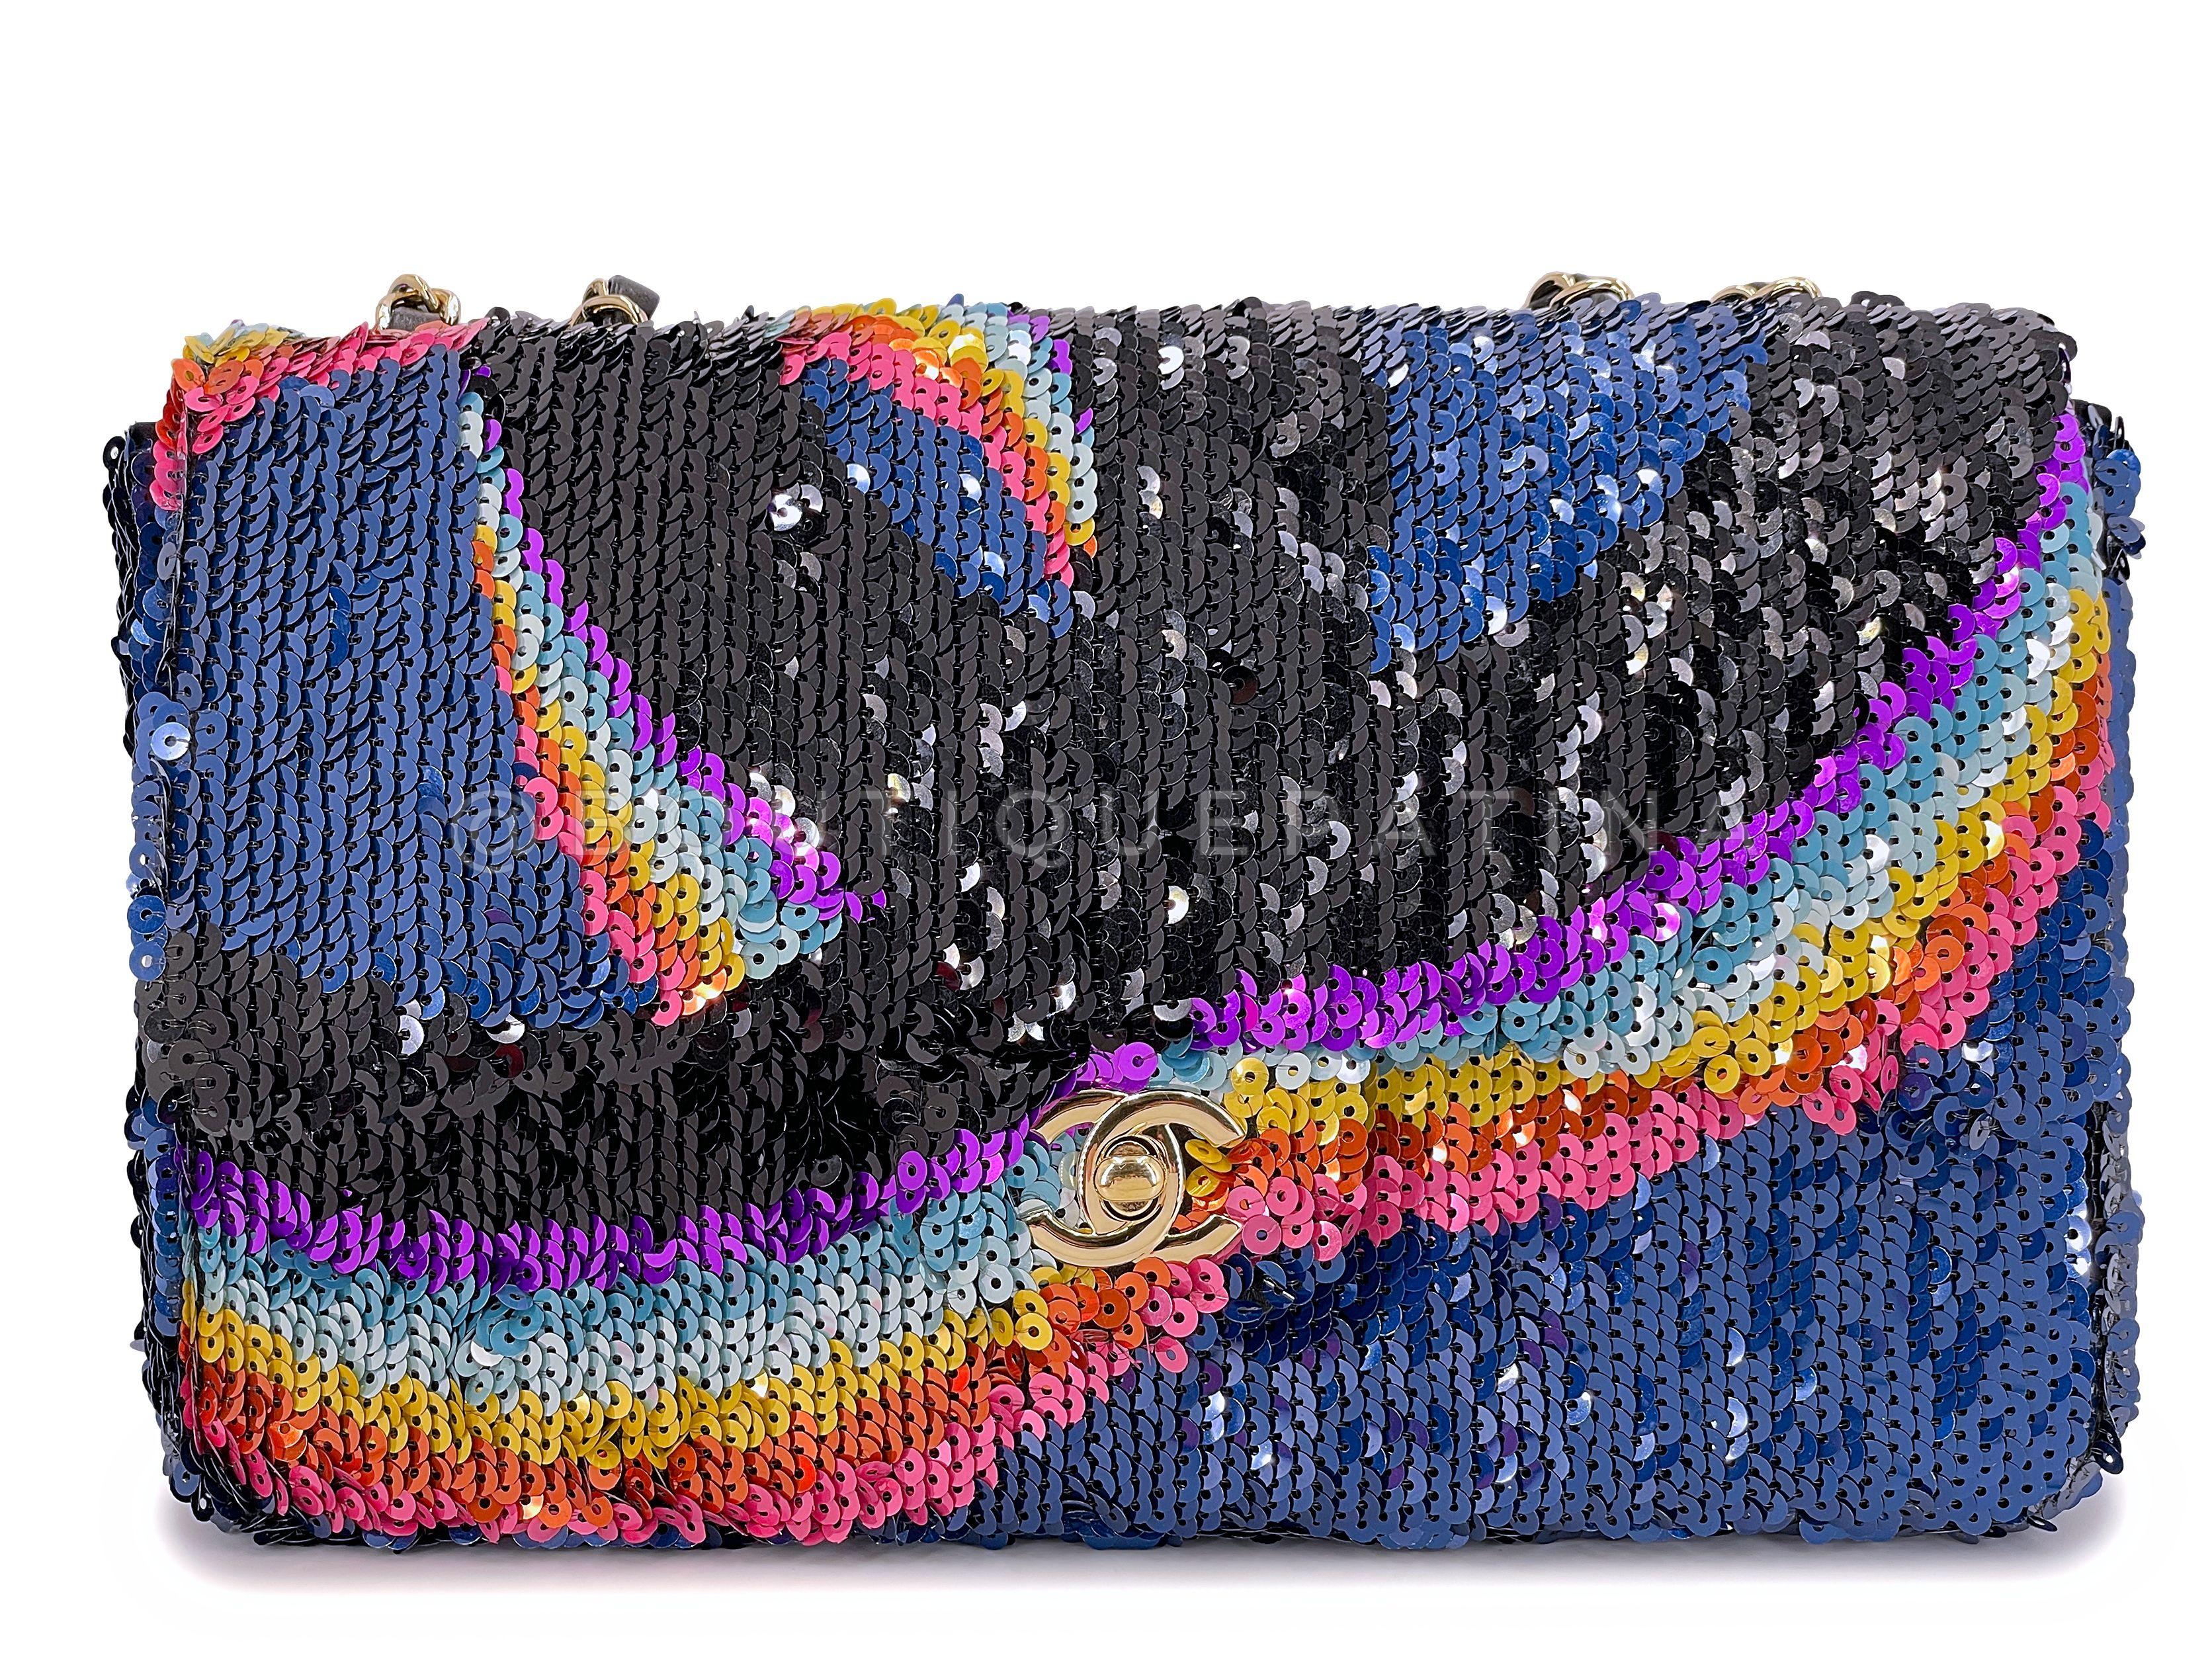 Store item: 67259
A stunning collectible from 2021 is this Chanel 21K Rainbow Sequin Medium Flap Bag. 

Made of a sequin exterior of rainbow hues, a giant 